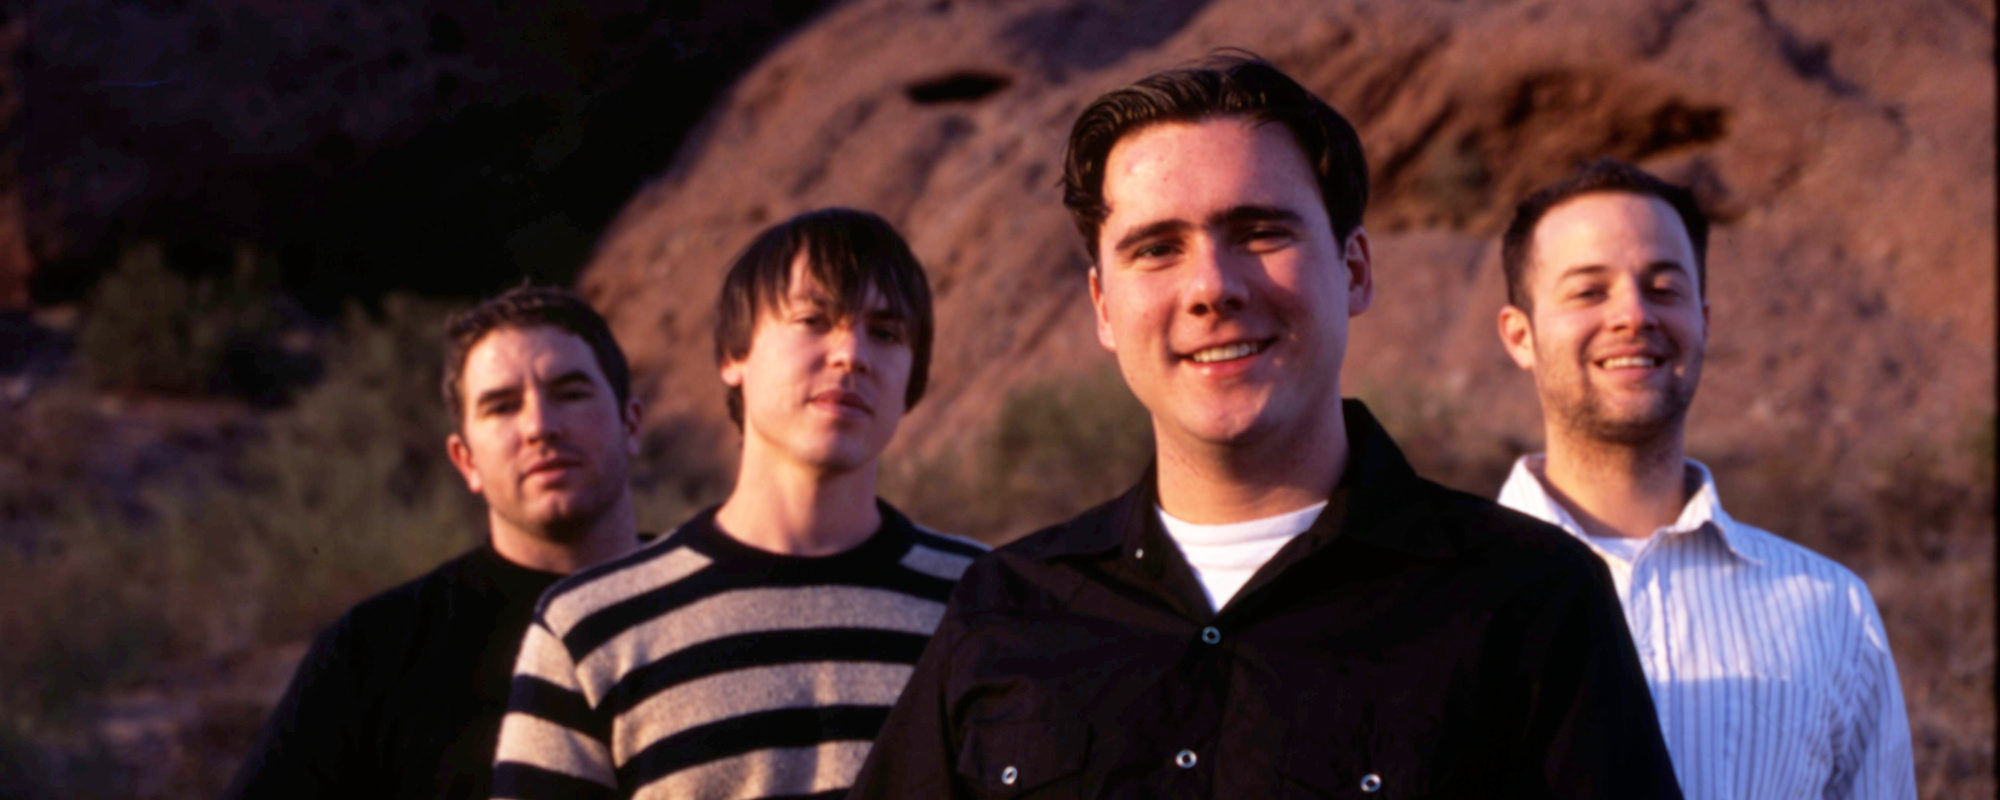 Behind the Band Name: Jimmy Eat World